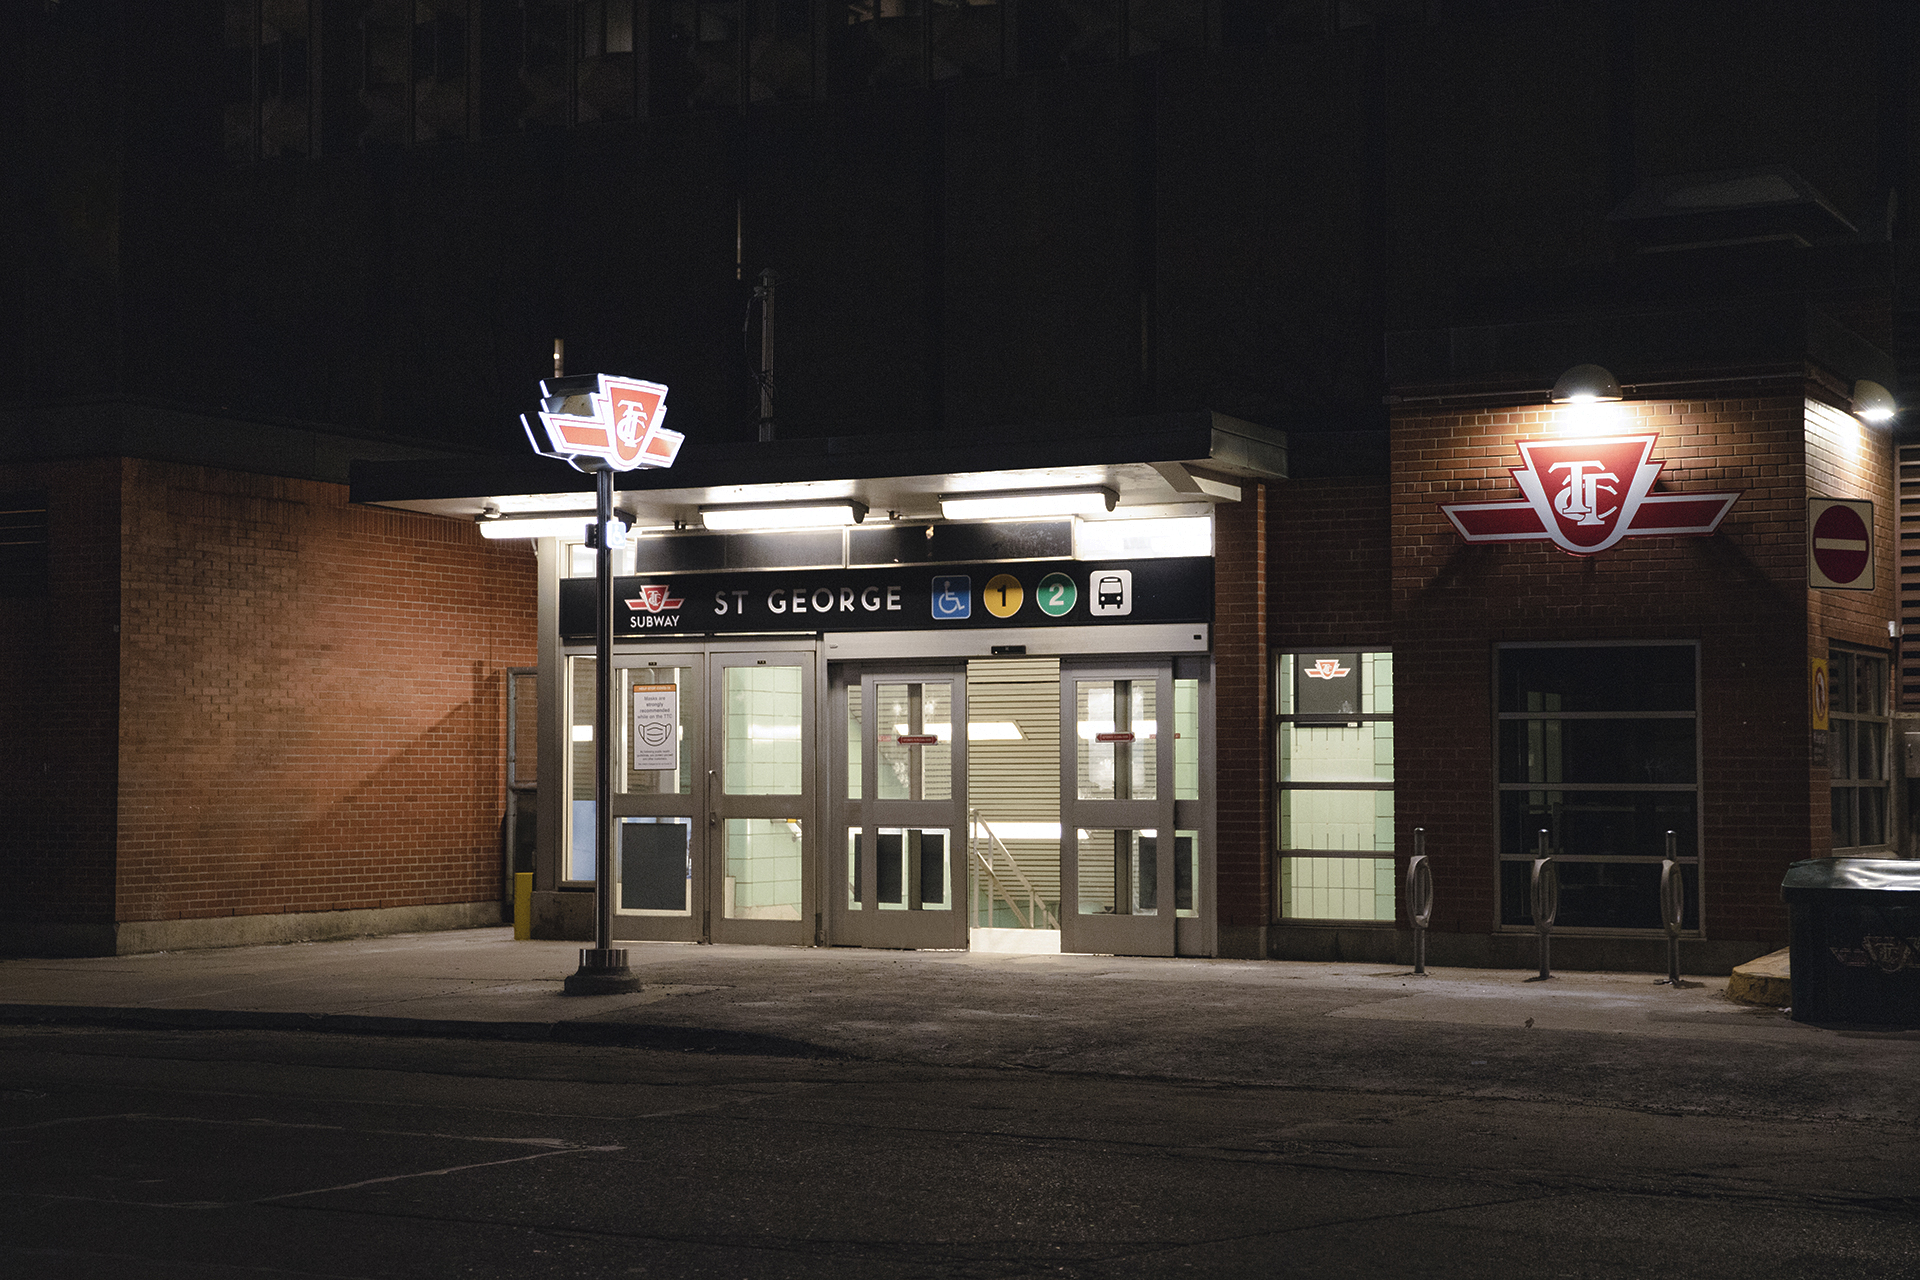 The St. George Subway station photographed from across the street. It is late at night and there are no lights coming from buildings in the background. The only light source in the image is from inside the subway station as well as a TTC sign outside on the sidewalk. The doors to the subway station are partially open but there are no people or cars.